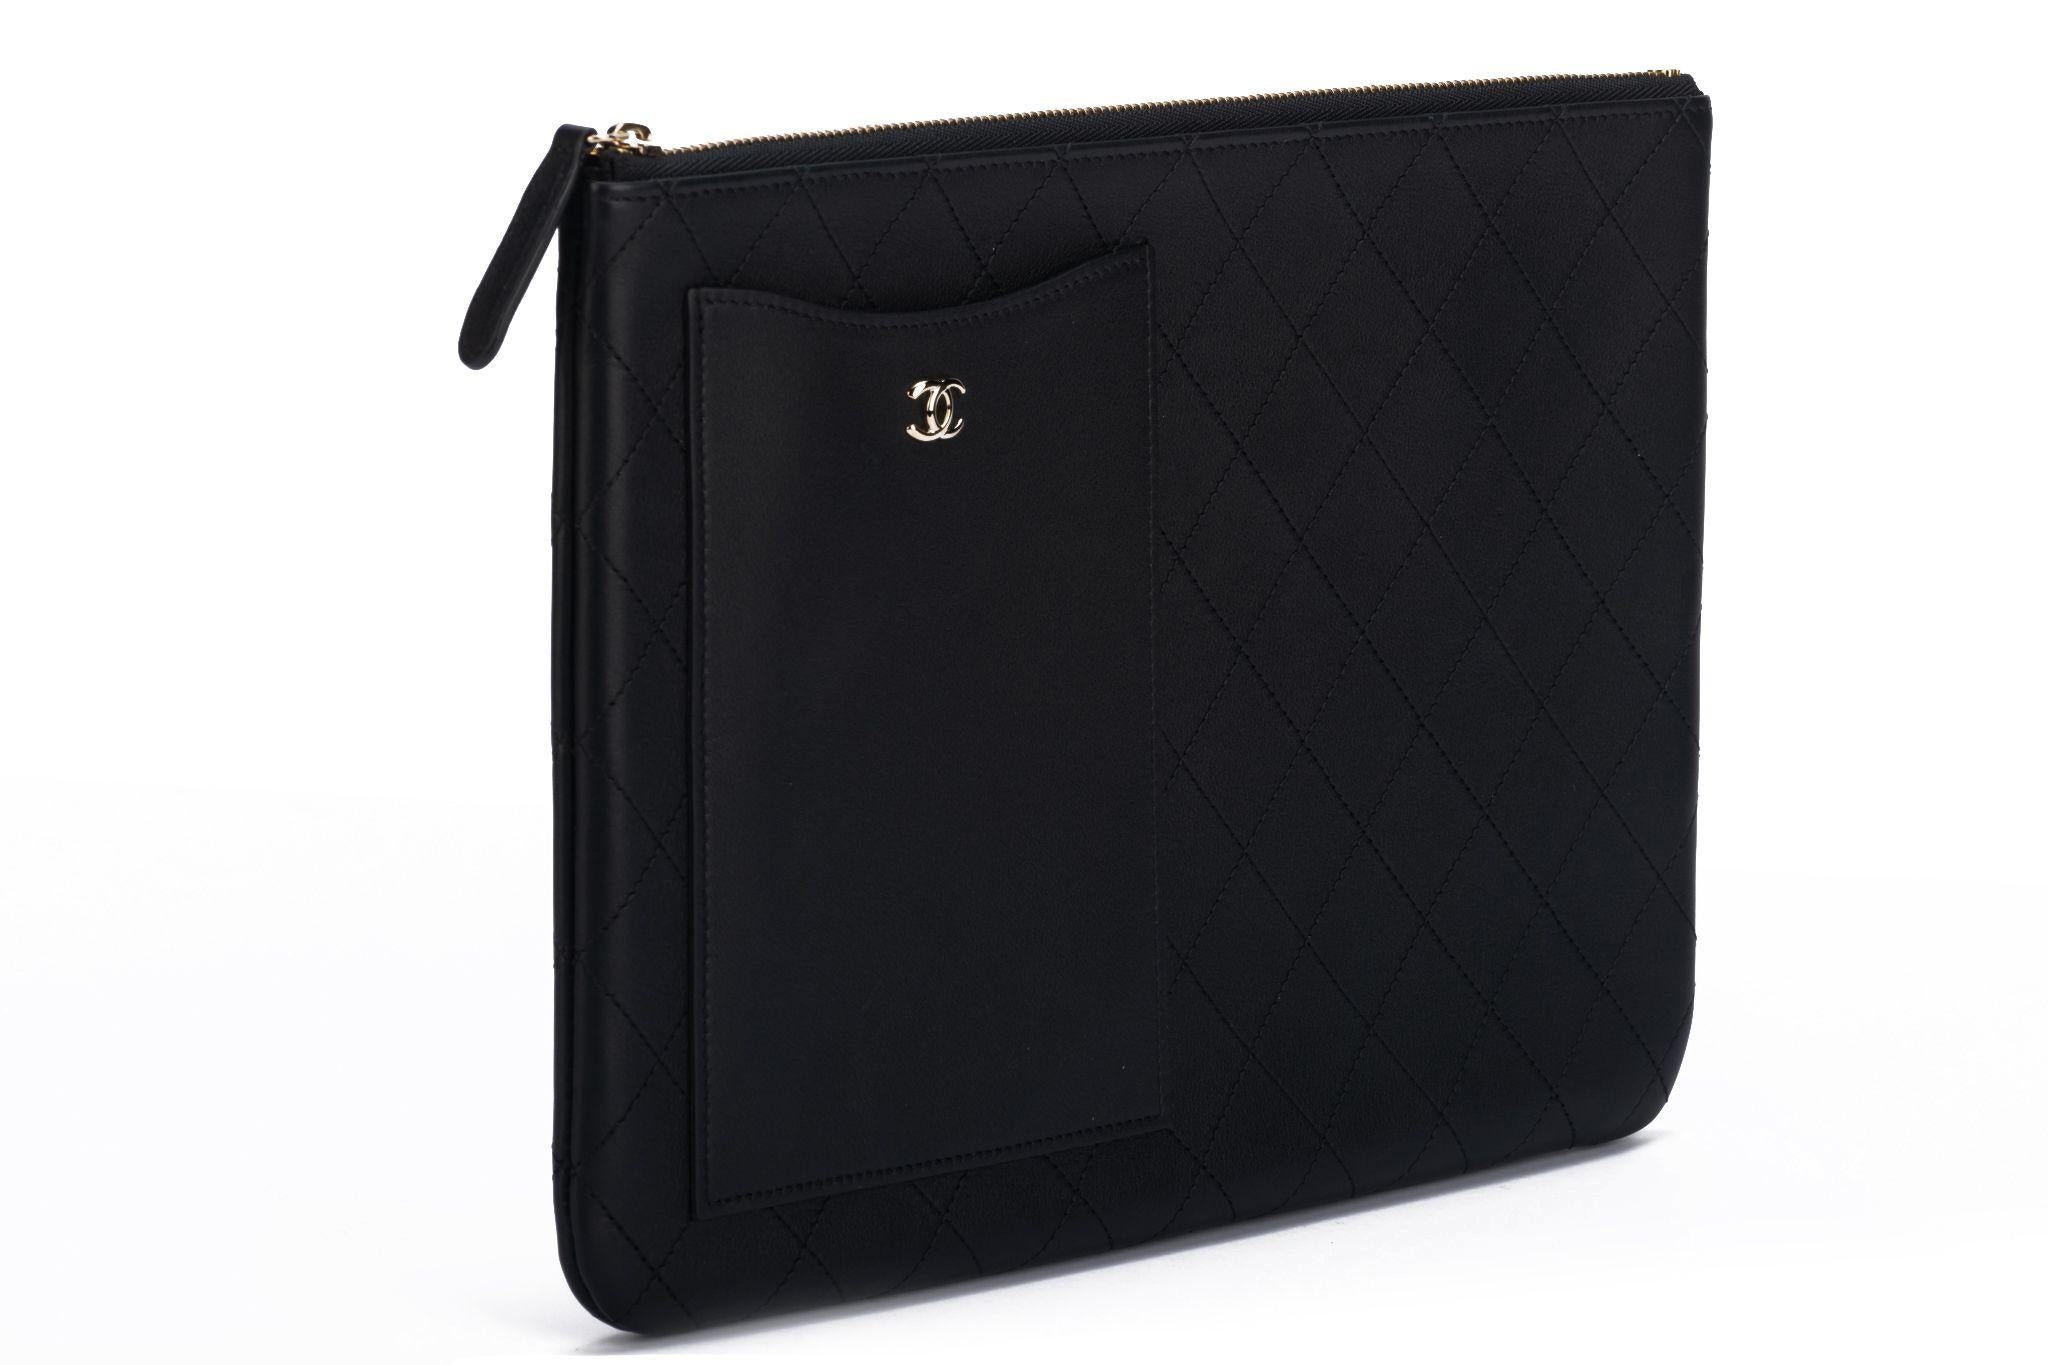 Chanel new black Lambskin quilted leather clutch. Gold tone hardware. Collection 28. Comes with hologram , ID card, original dust cover and box.